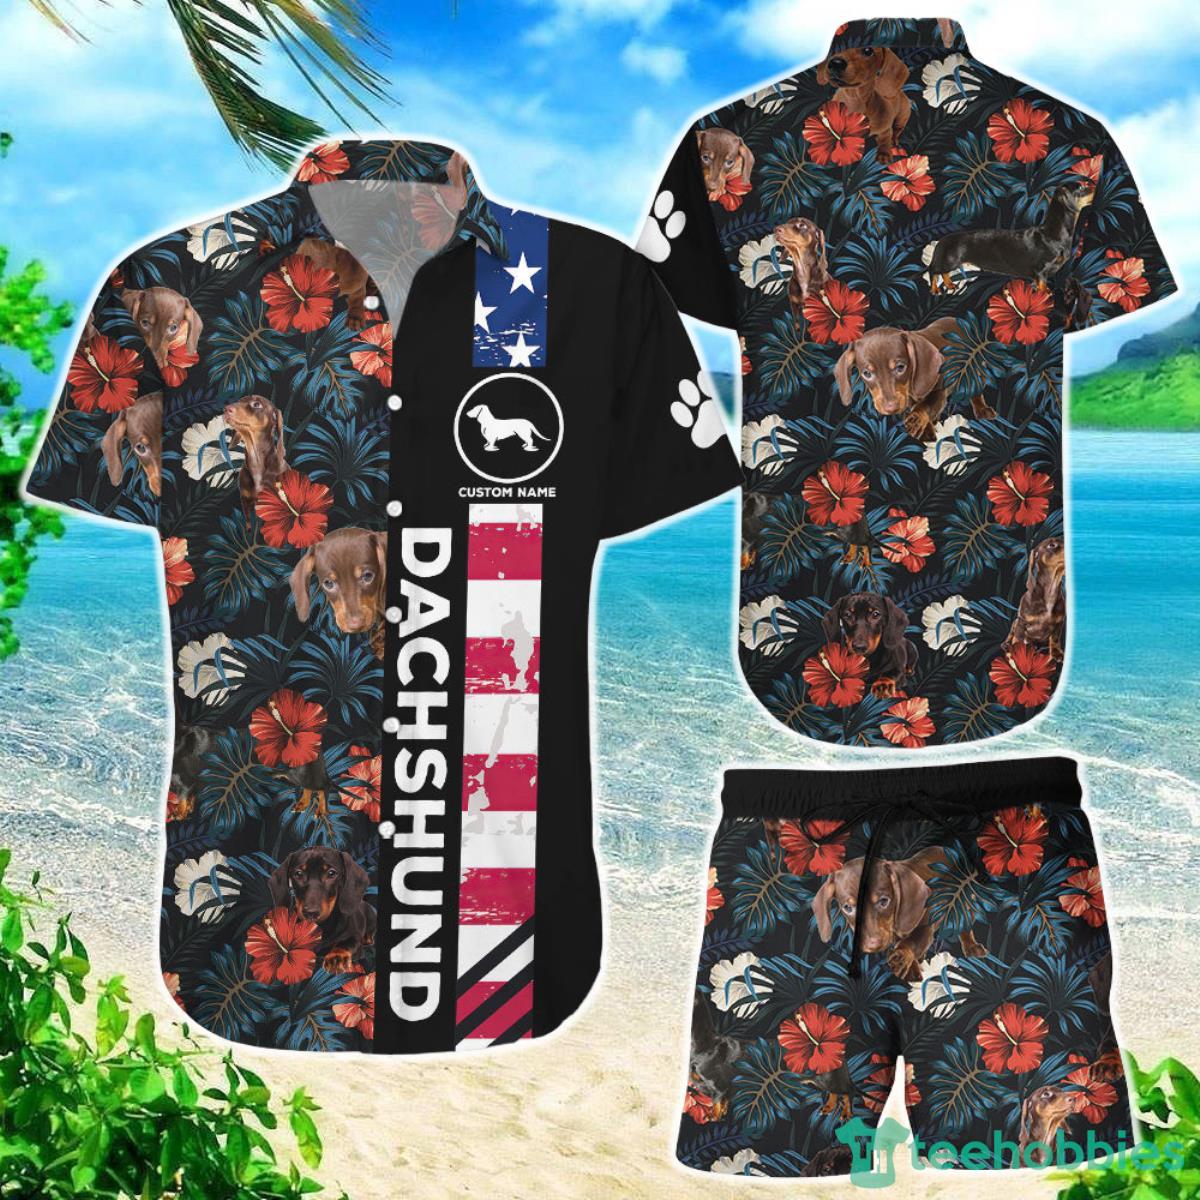 Dachshund American Hawaiian Shirts Cute Dog With Flag And Tropical Flowers Shirts Best Gift For Summer Product Photo 1